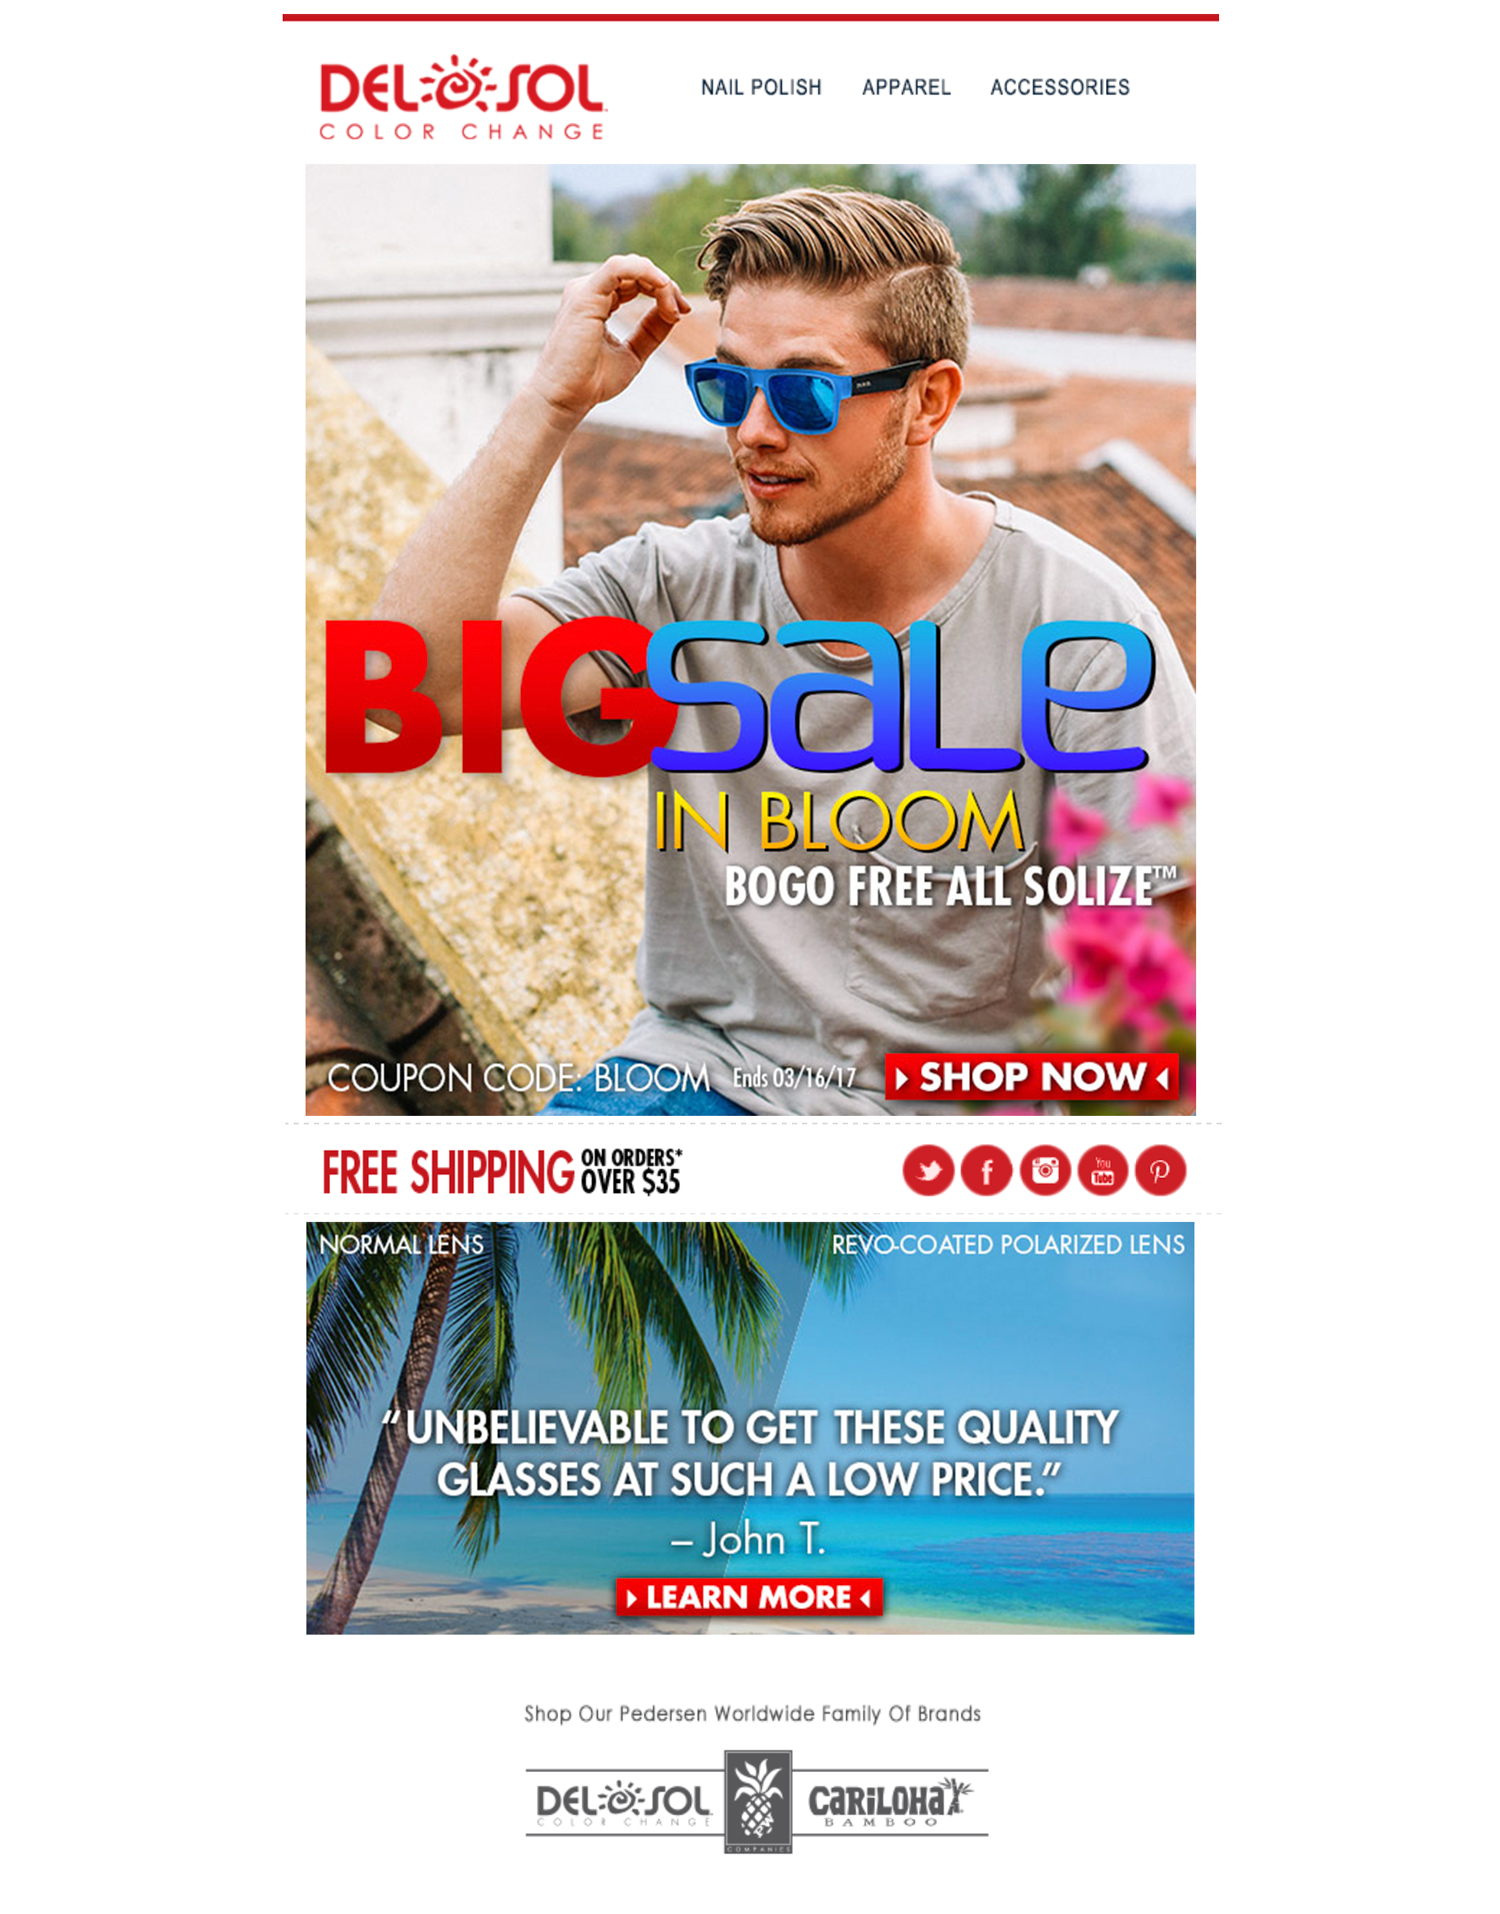 Designed Email Campaign to show off new Solize™ models while tying in with Del Sol's fun in the sun beach brand.